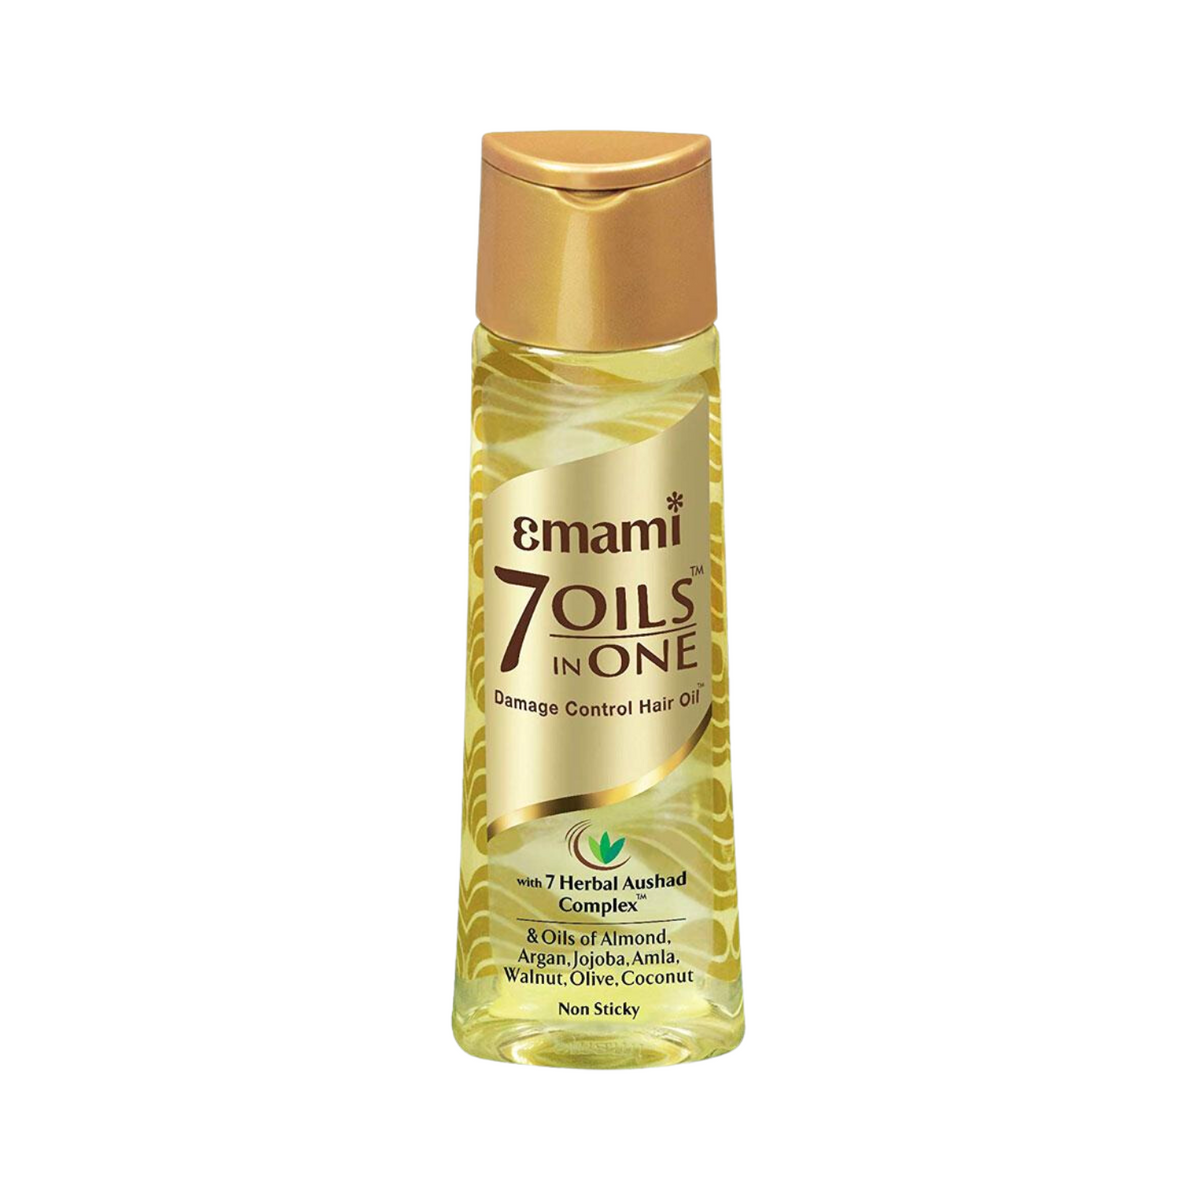 emami-7-oils-in-one-for-damage-control-hair-oil-200ml